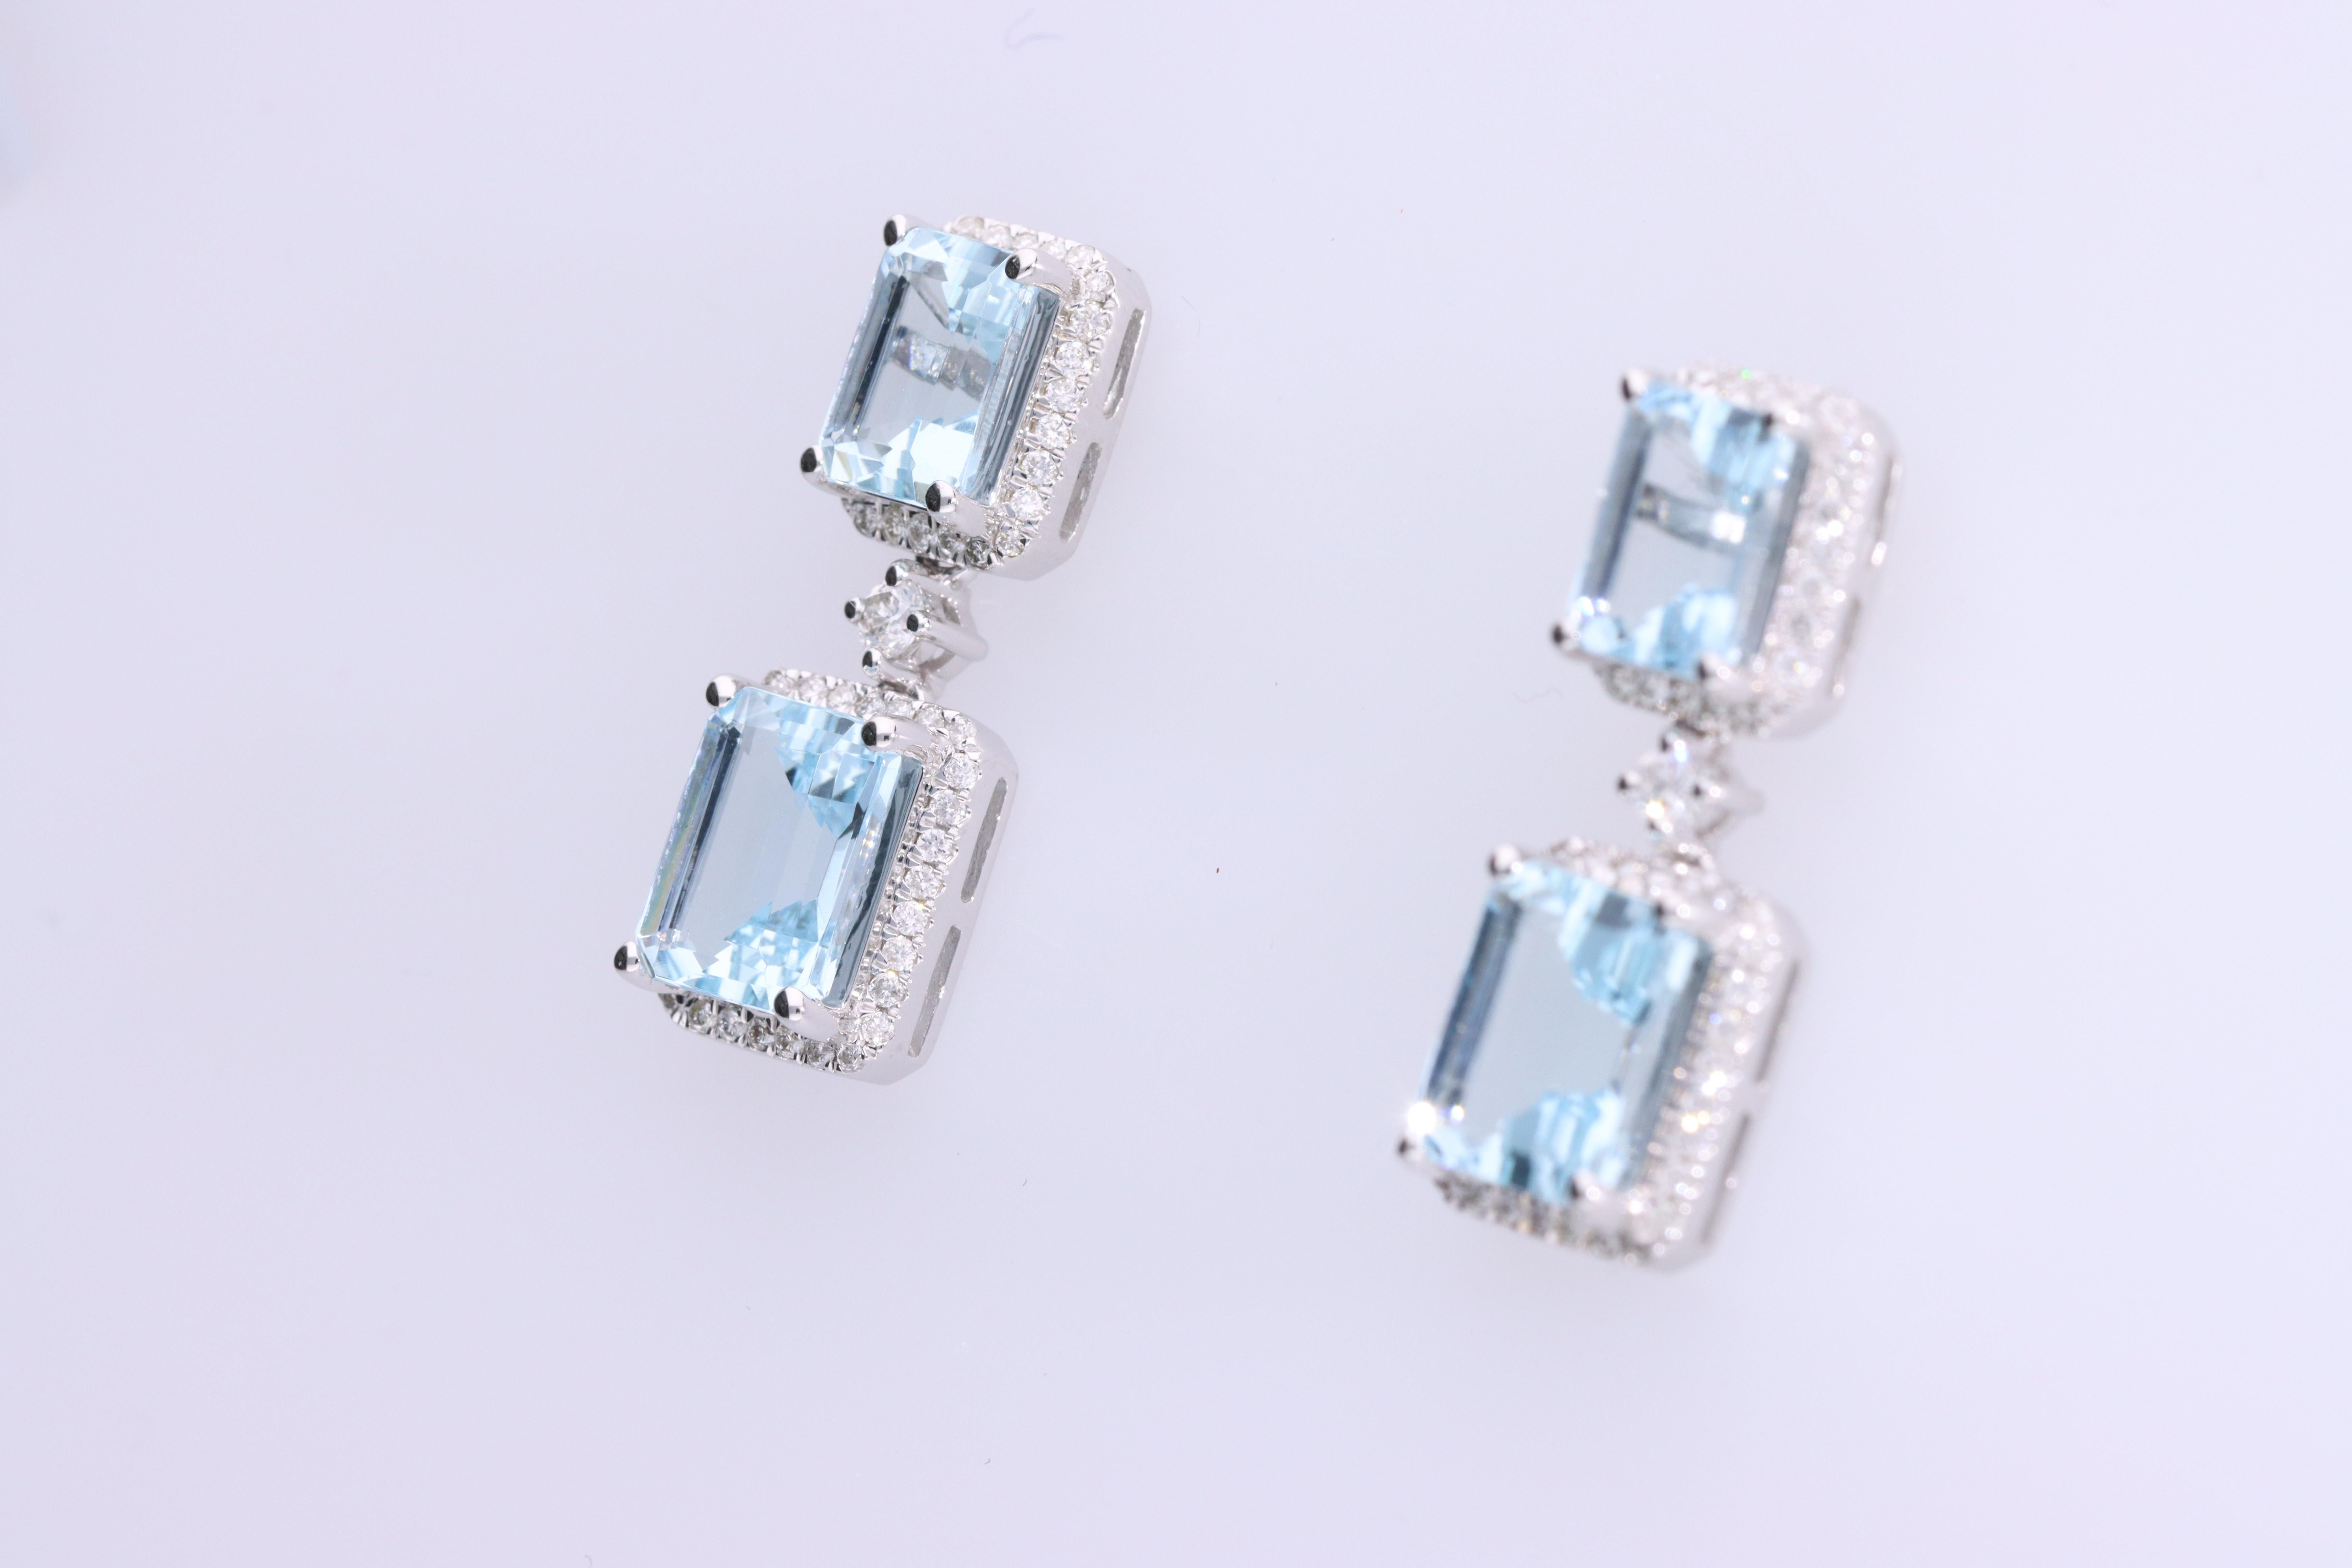 Each of these pretty earrings from Gin & Grace features a Aquamarine gemstone on a lever back clasp adorned with white diamonds. These earrings are made of rich 14-karat White gold with a high polish. Style: Dangle, Gemstone Cut : Emerald-cut Total